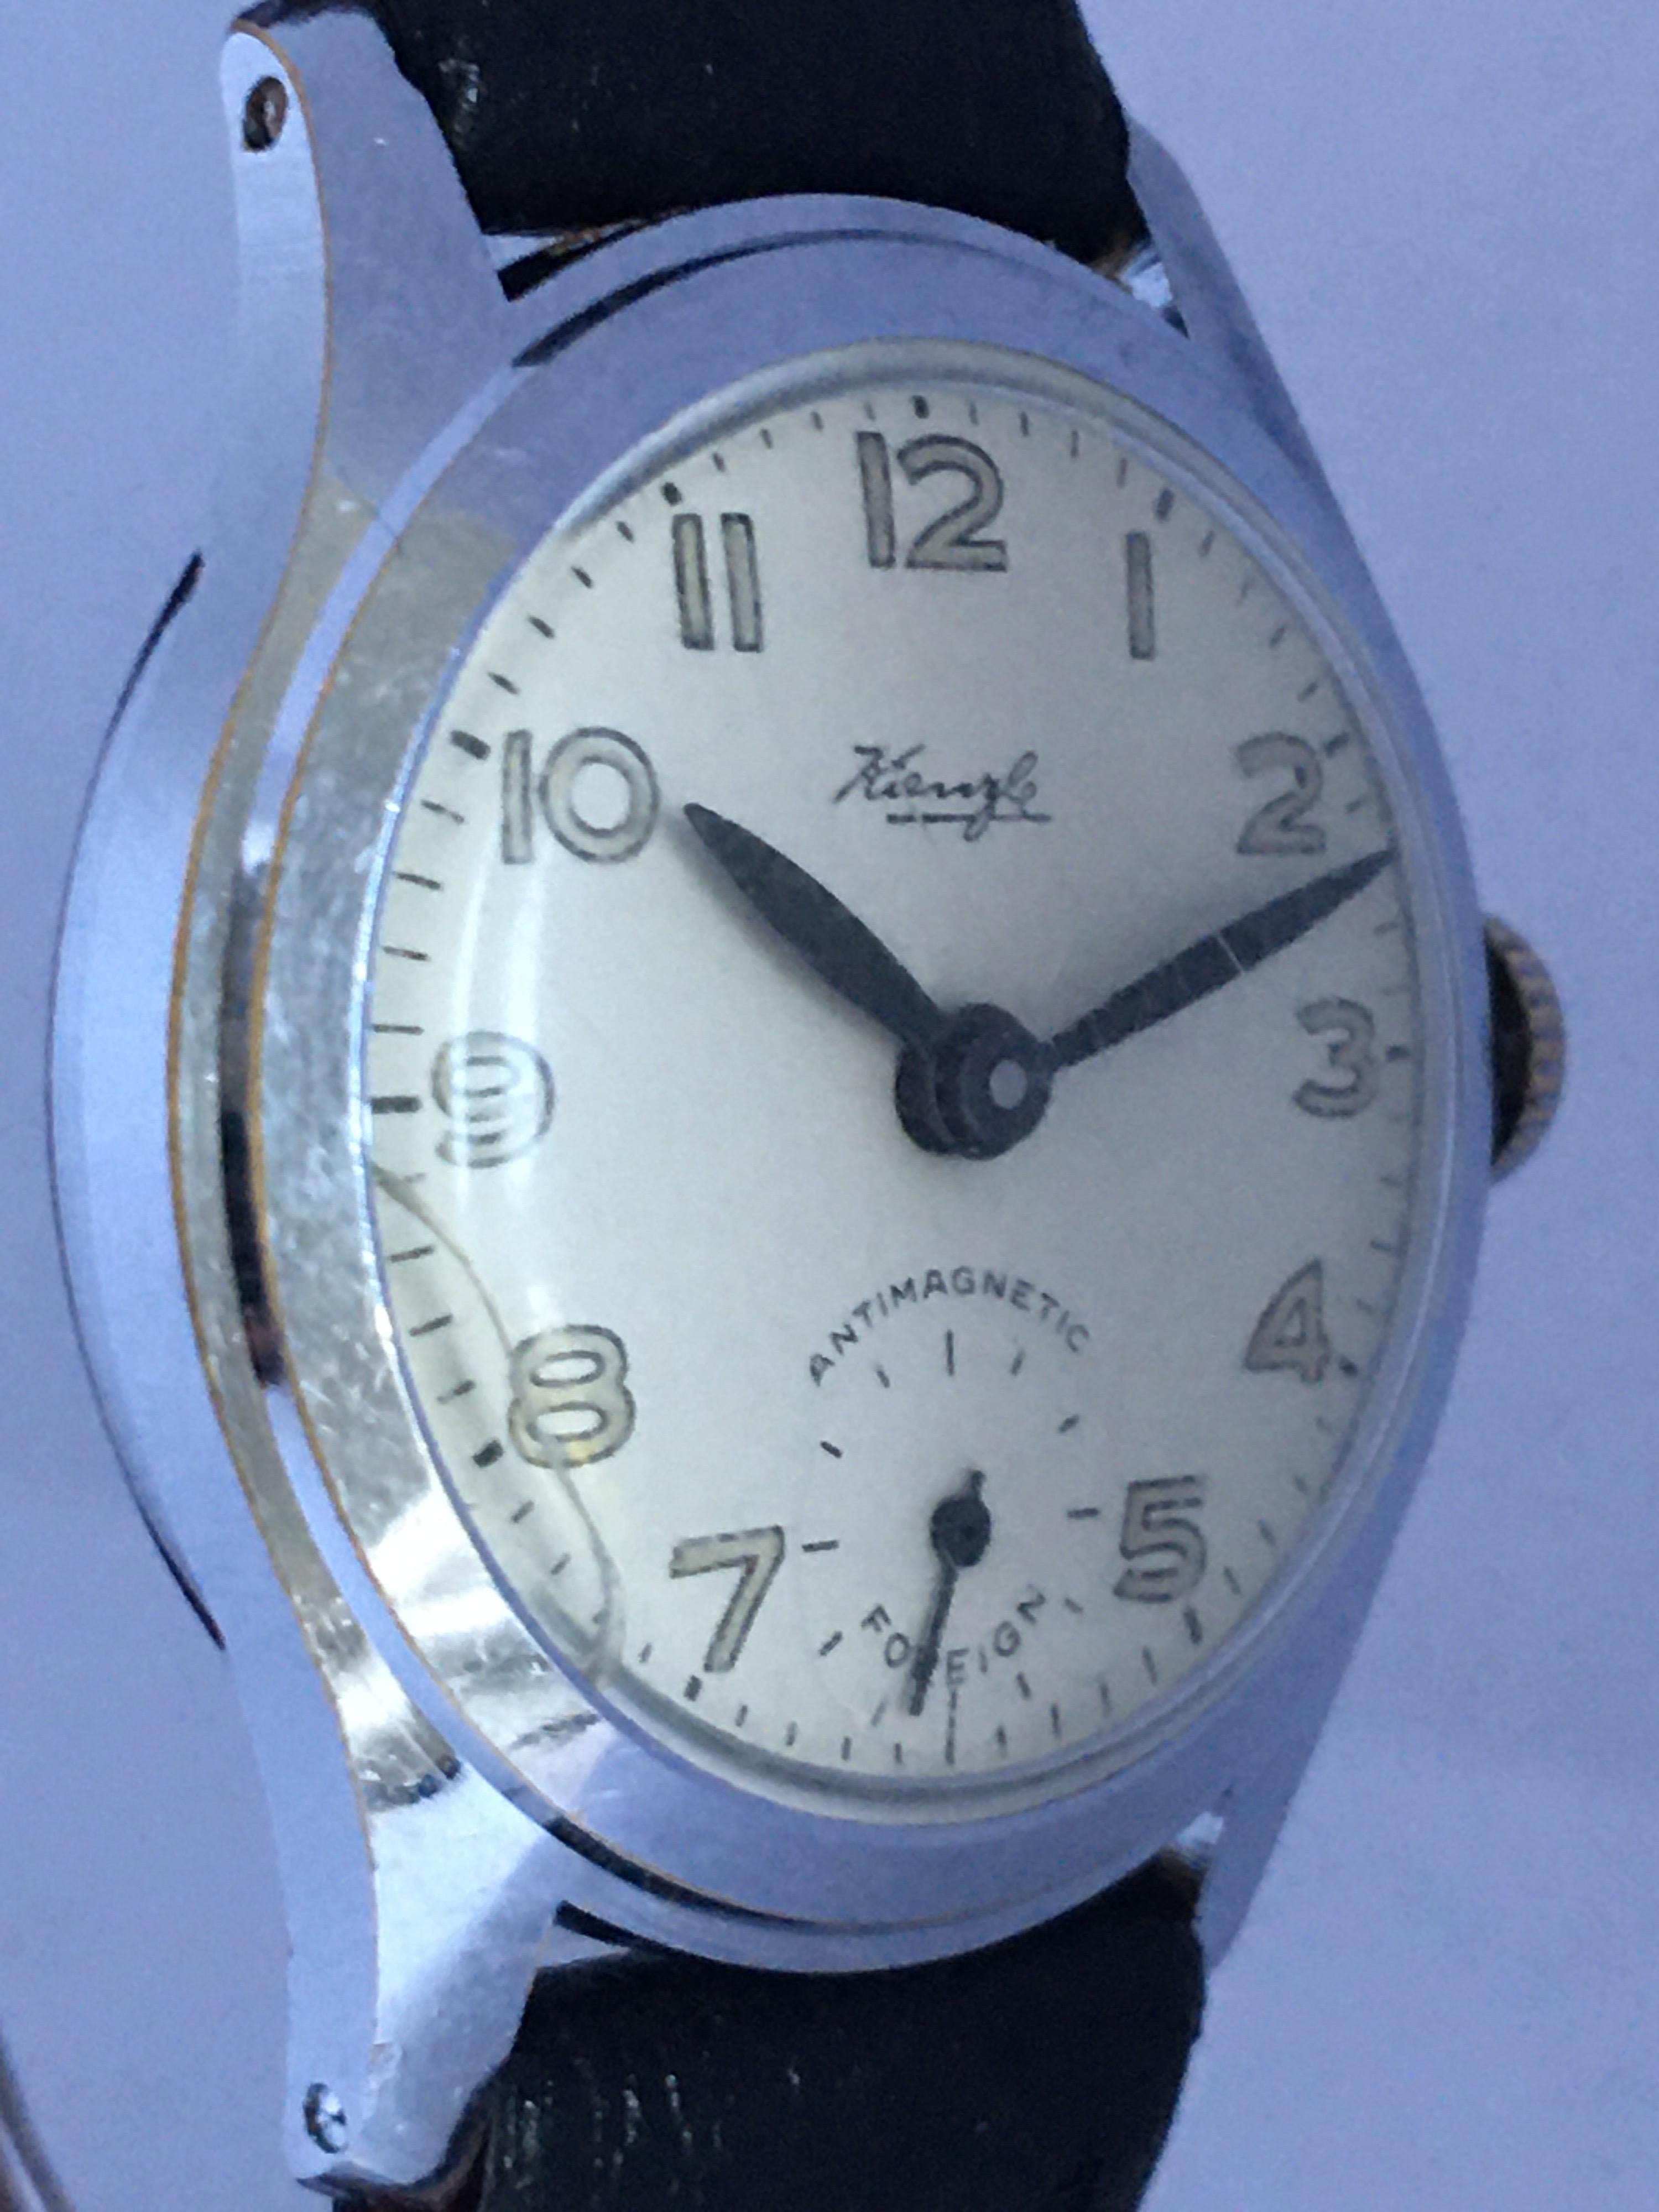 This beautiful 31mm diameter vintage hand winding watch is in good working condition and it is running well. Visible signs of ageing and wear with light scratches on the glass and and on the watch case as shown. Some tarnished on the case as shown.